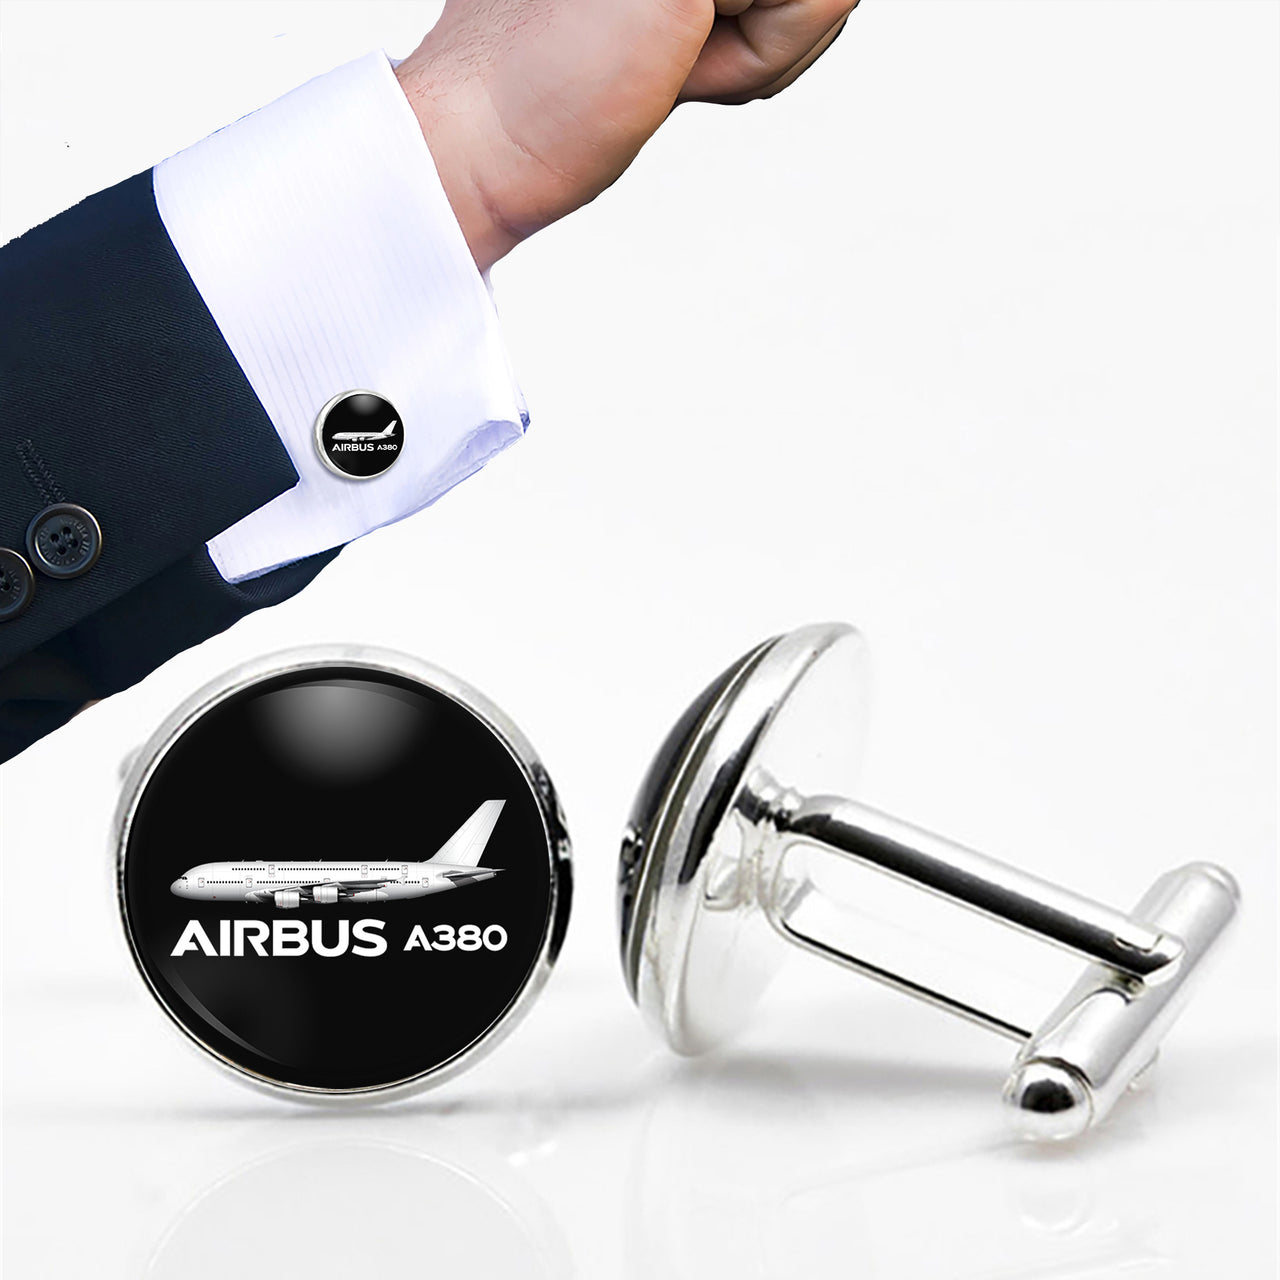 The Airbus A380 Designed Cuff Links